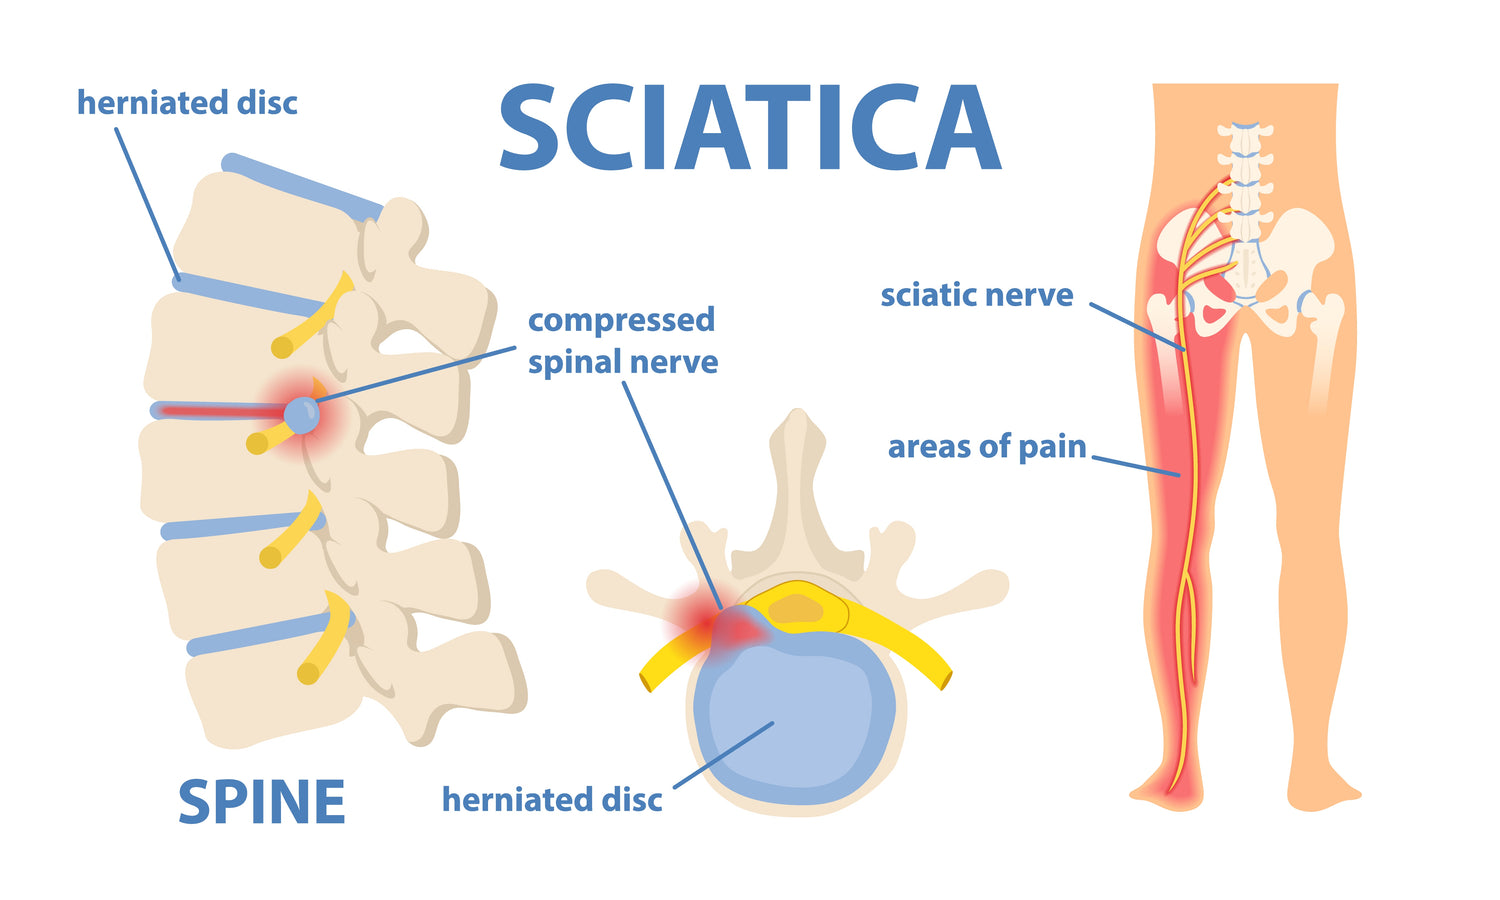 Sciatica - what it is and how to treat it